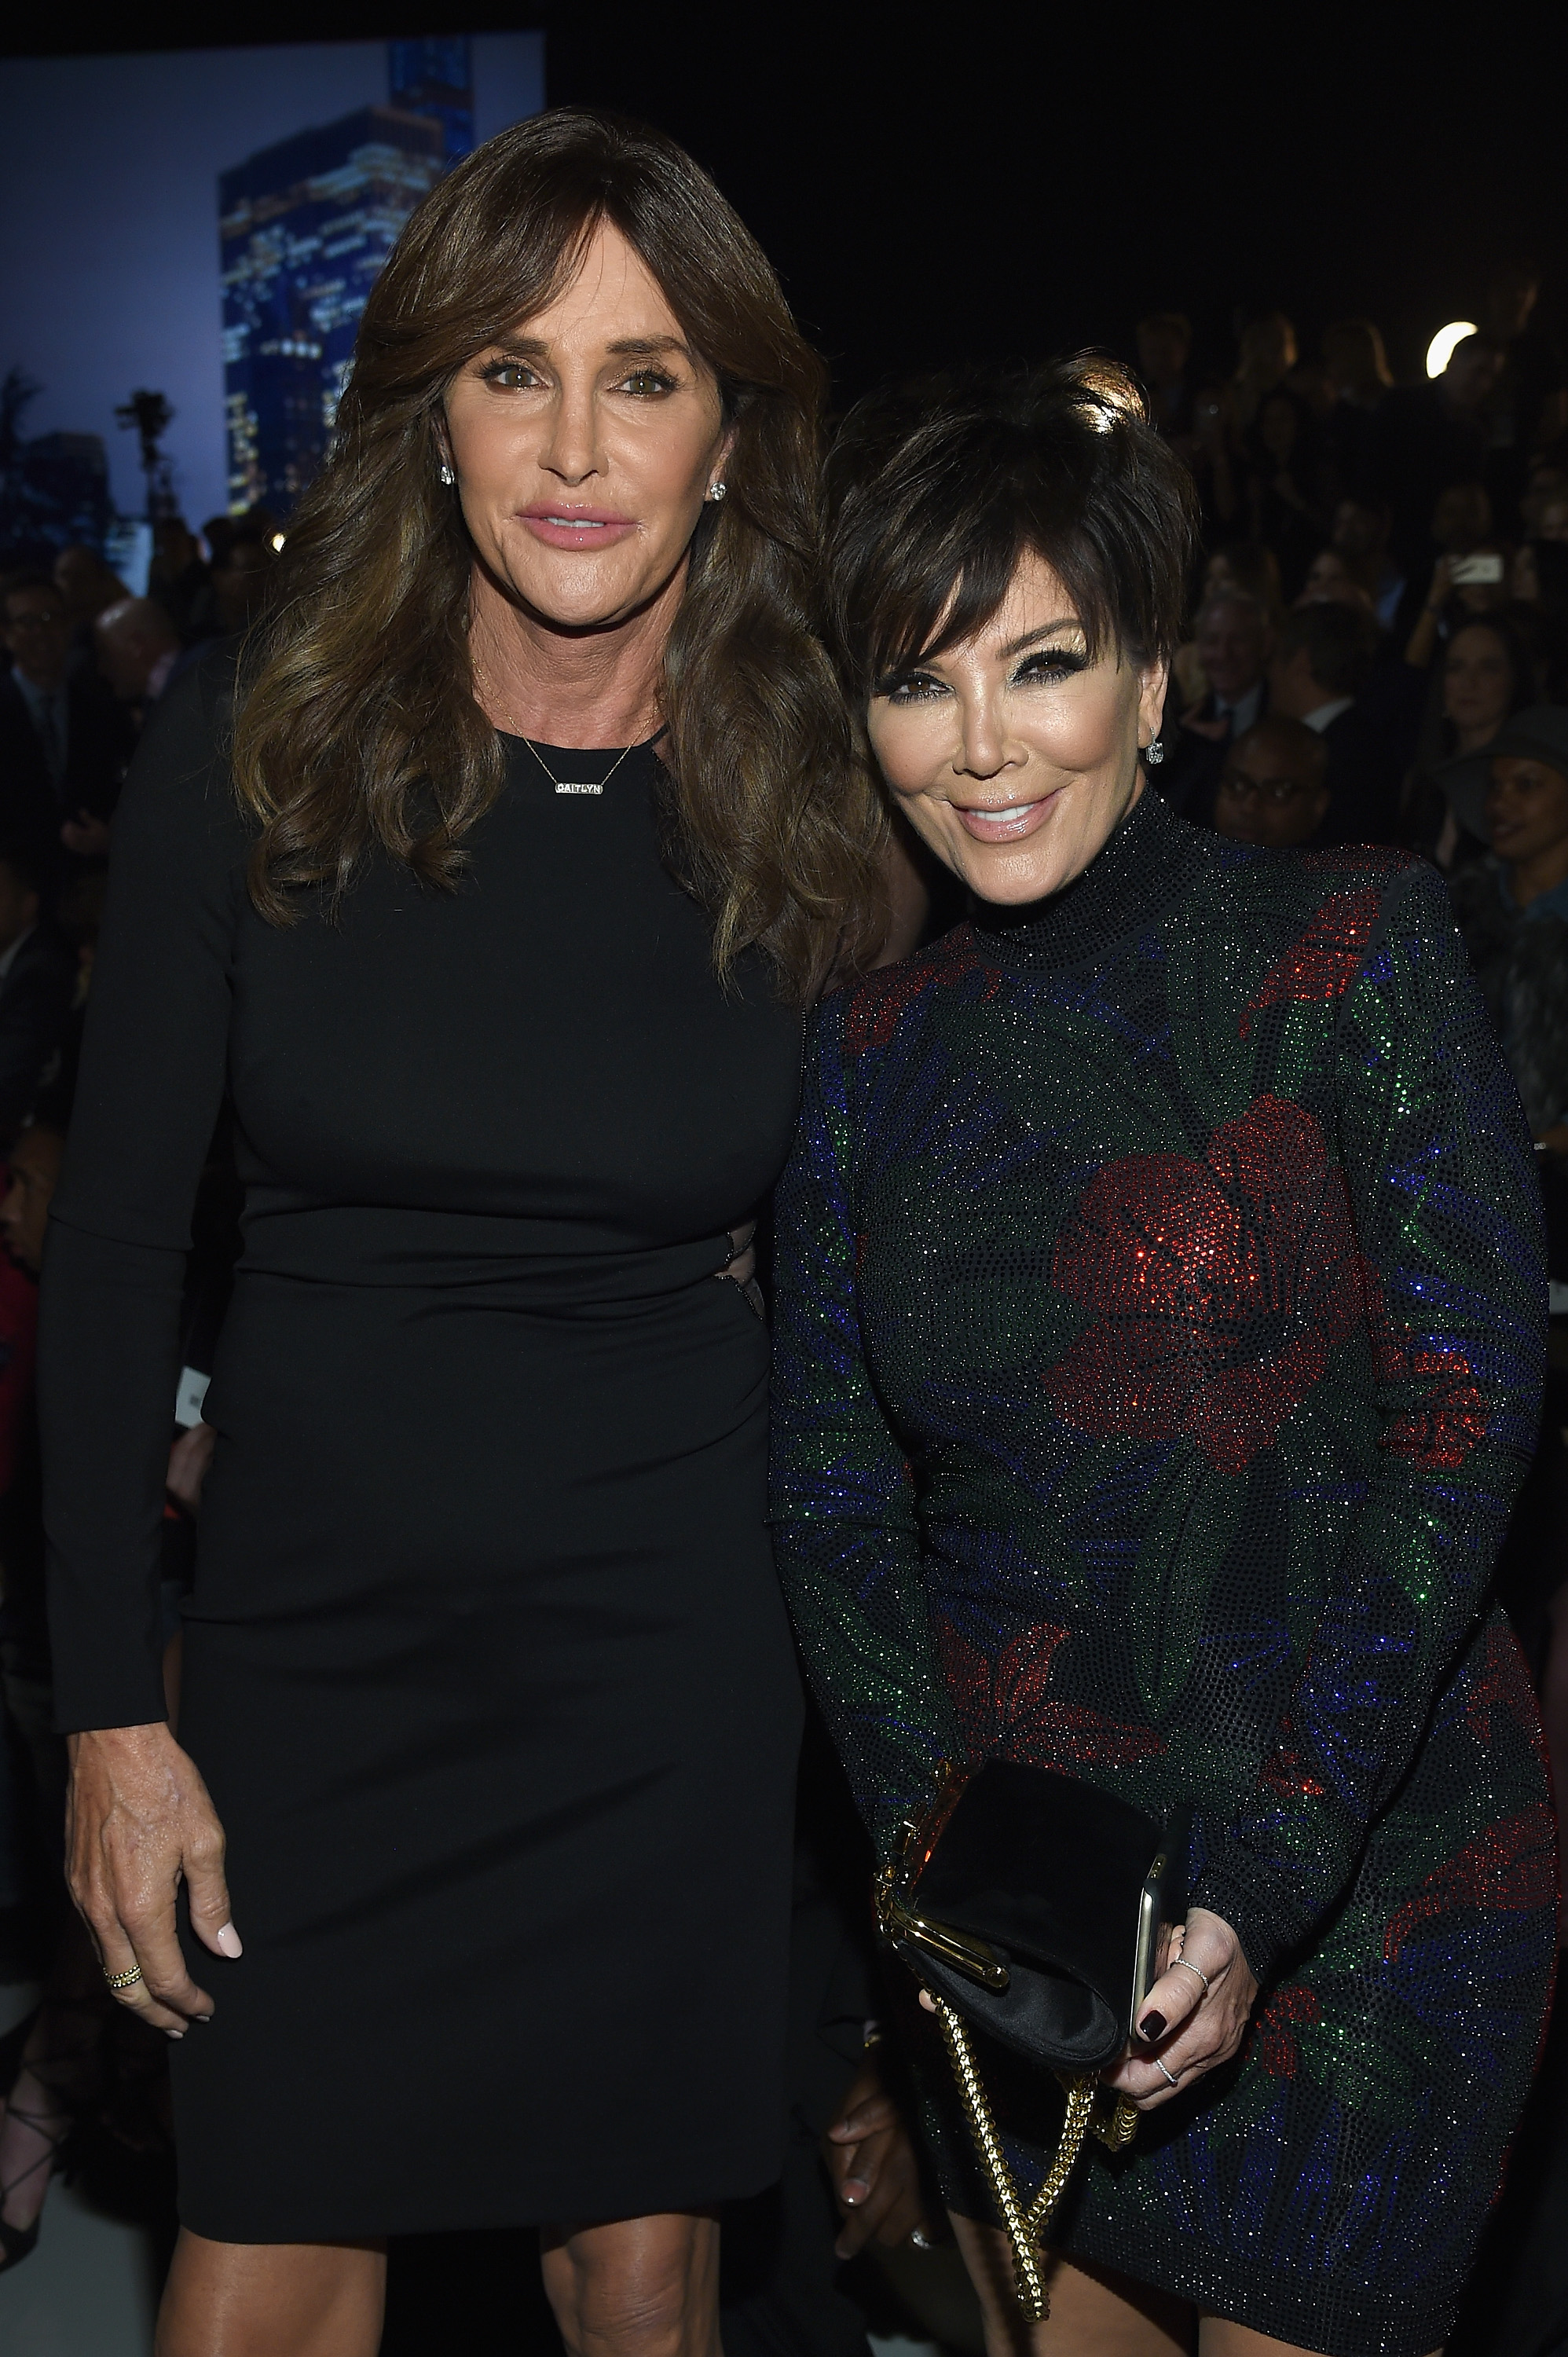 Caitlyn Jenner and Kris Jenner at Victoria's Secret Fashion Show in New York City on November 10, 2015 | Source: Getty Images